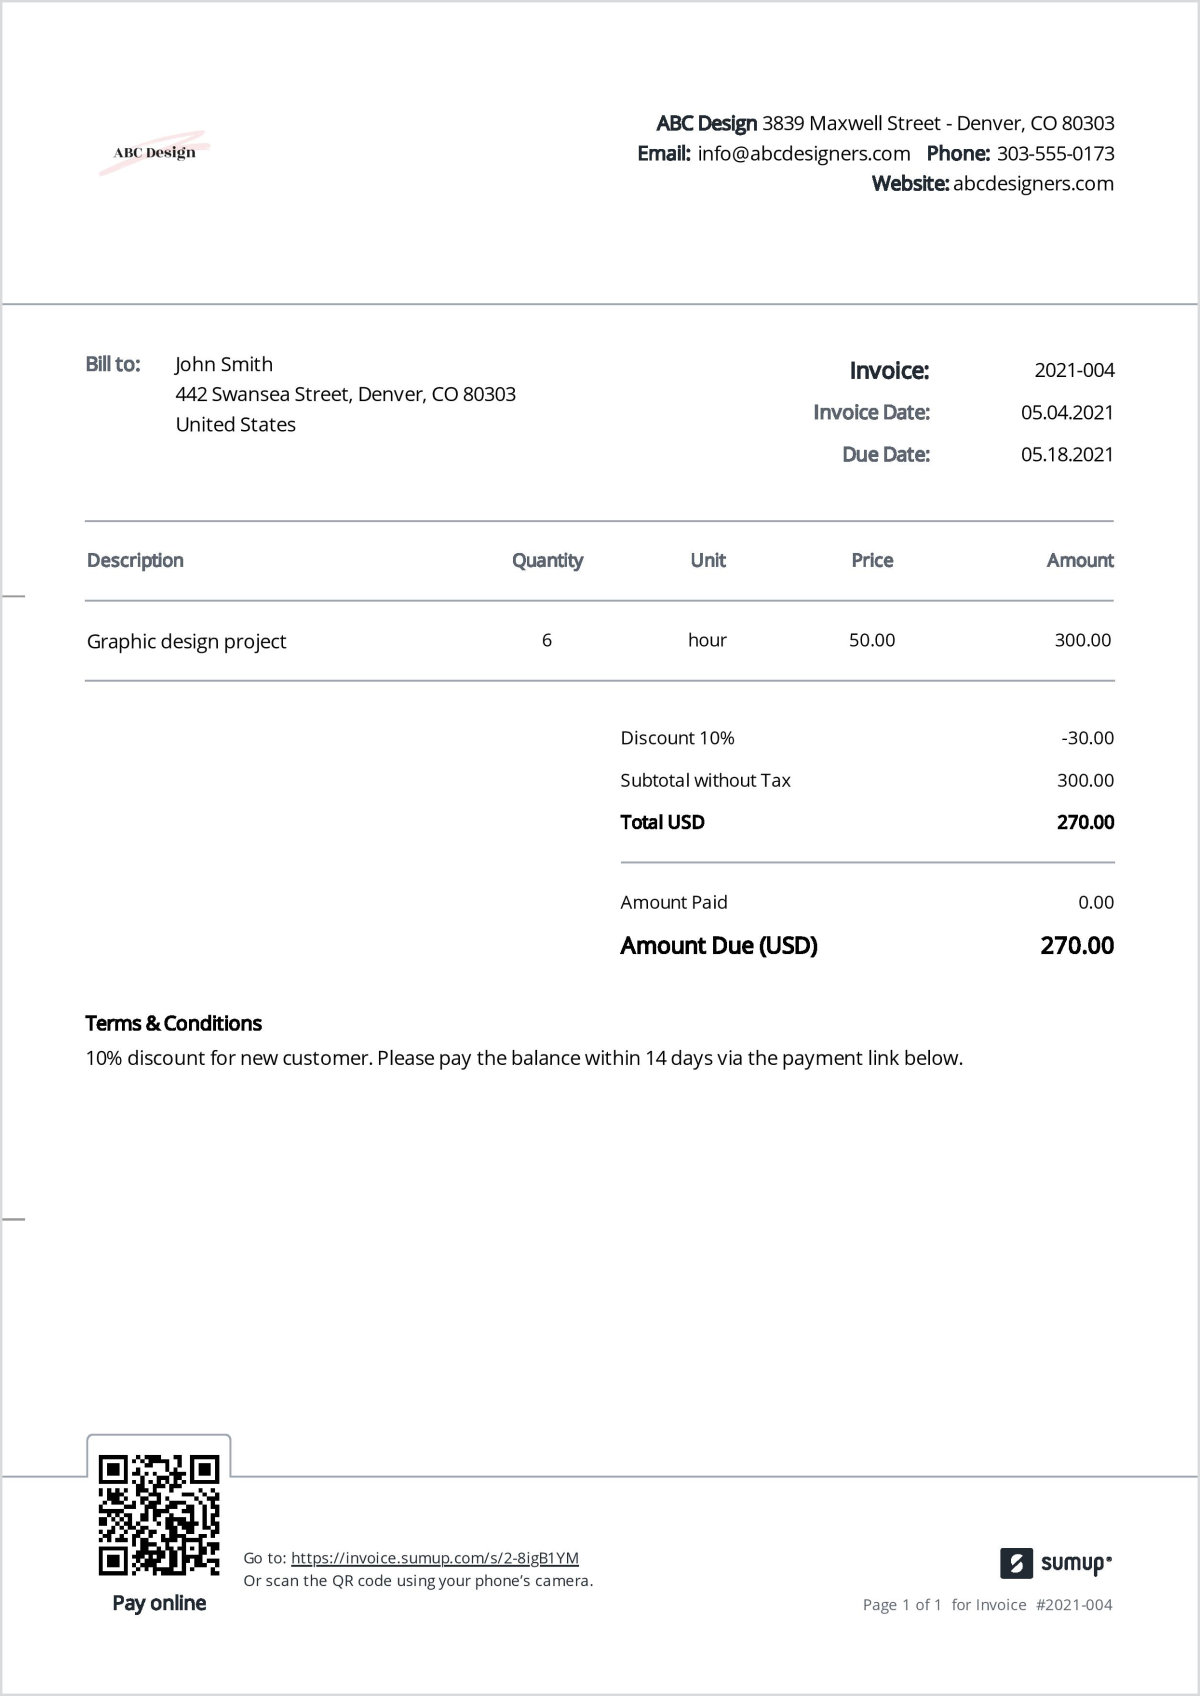 Sample invoice including a discount. 